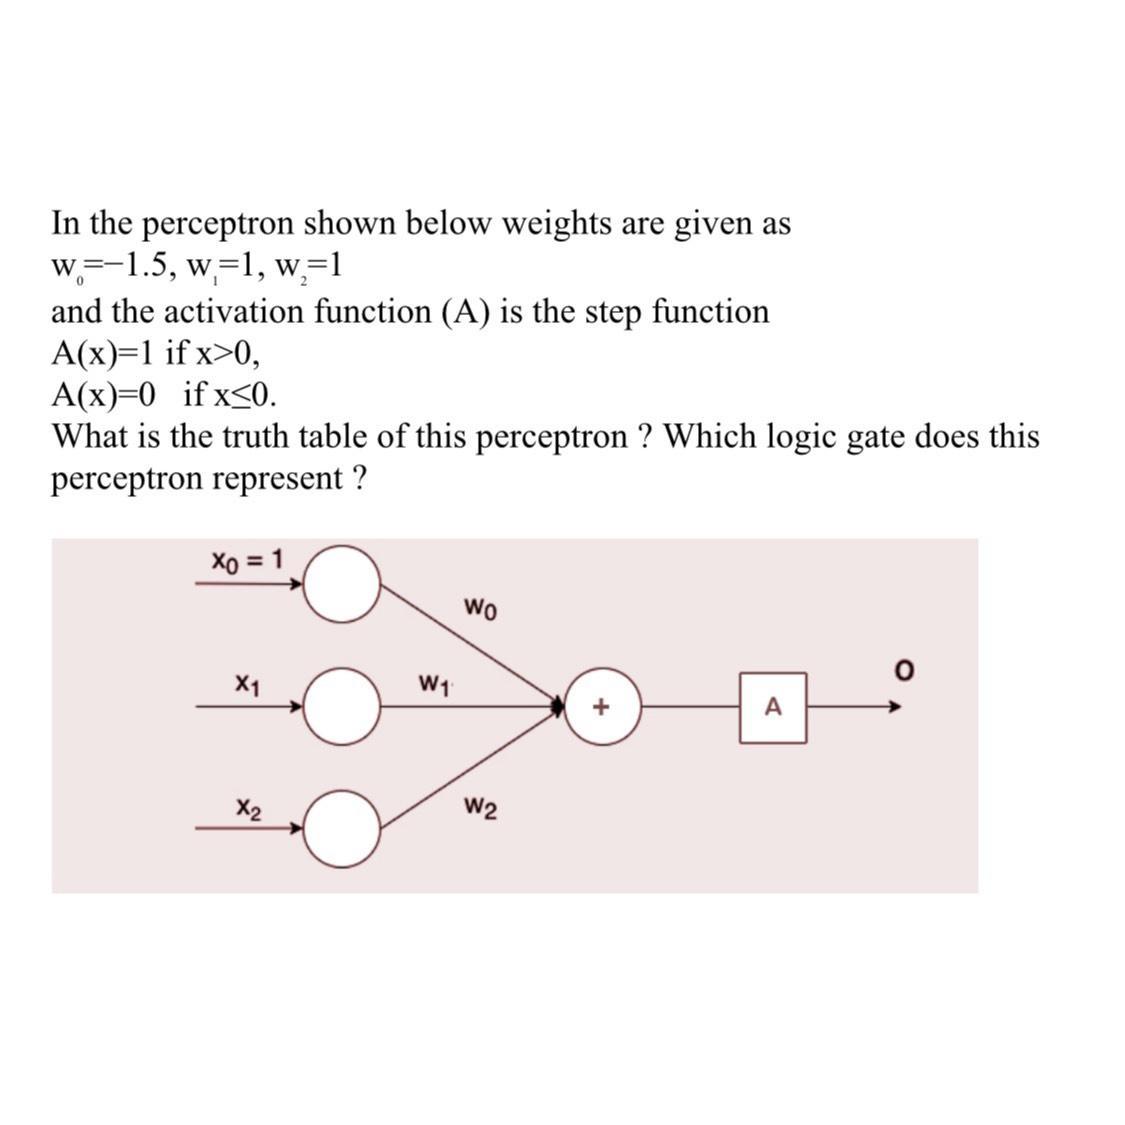 In the perceptron shown below weights are given as w=-1.5, w=1, w,=1 and the activation function (A) is the